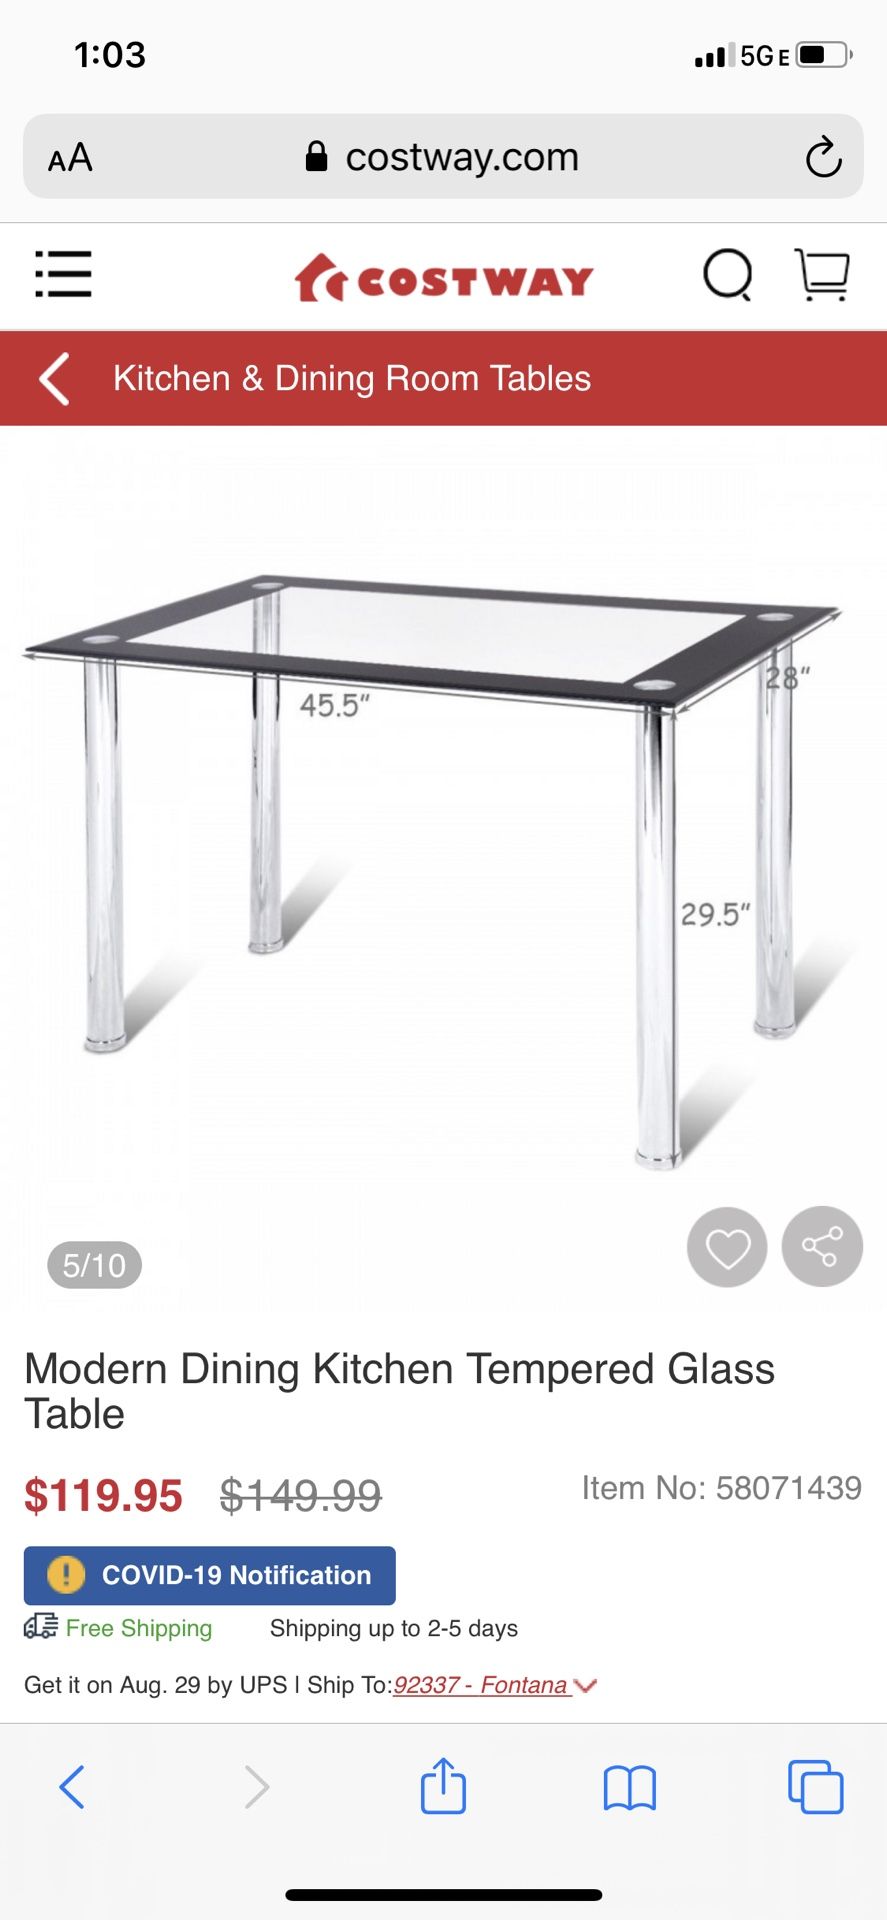 Modern Dining Kitchen Tempered Glass Table with 4 dining chairs